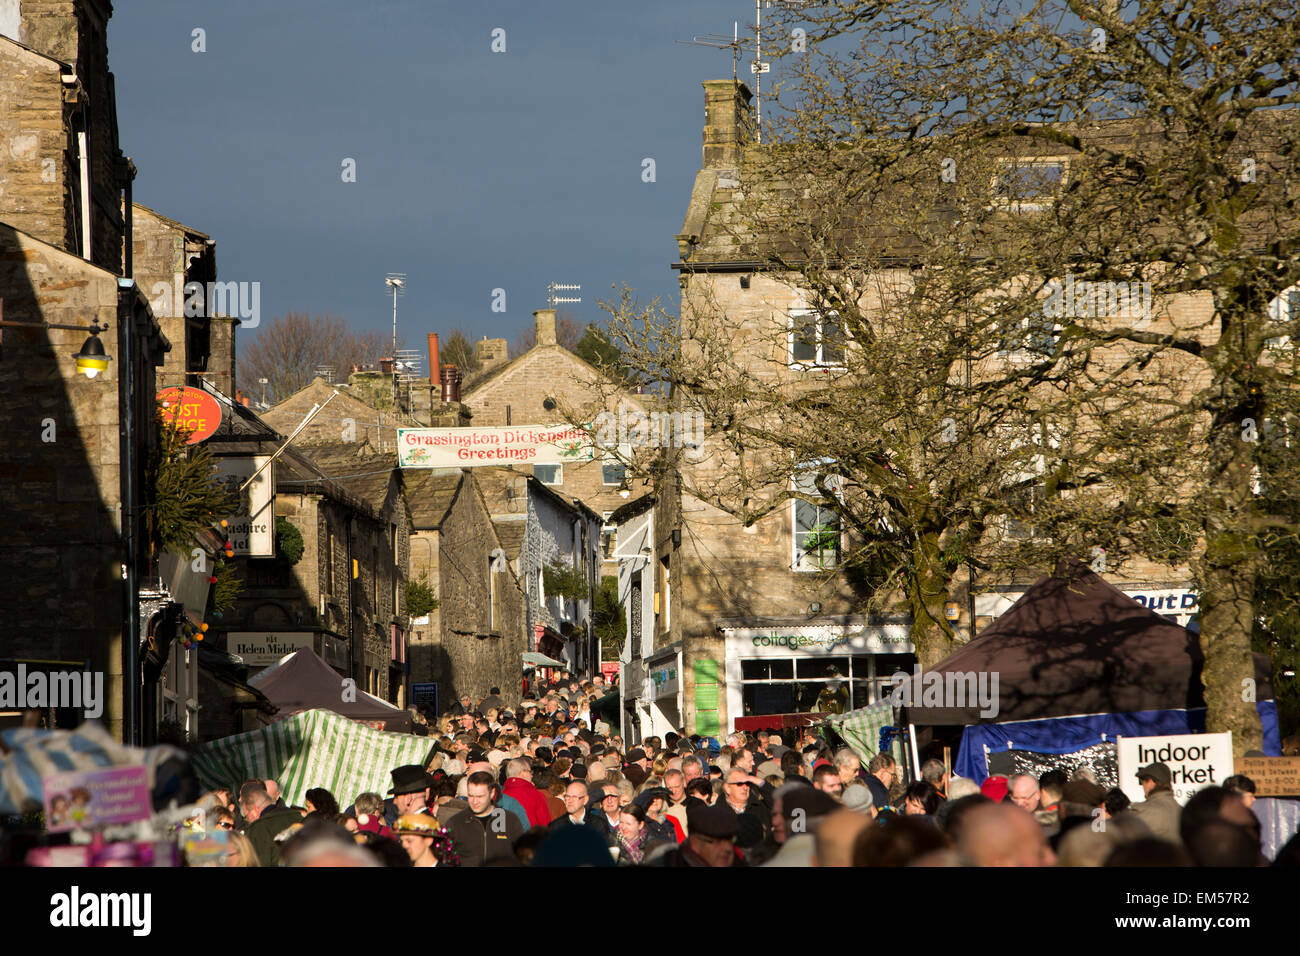 UK, England, Yorkshire, Grassington, Dickensian Festival, crowds of visitors in Main Street Stock Photo